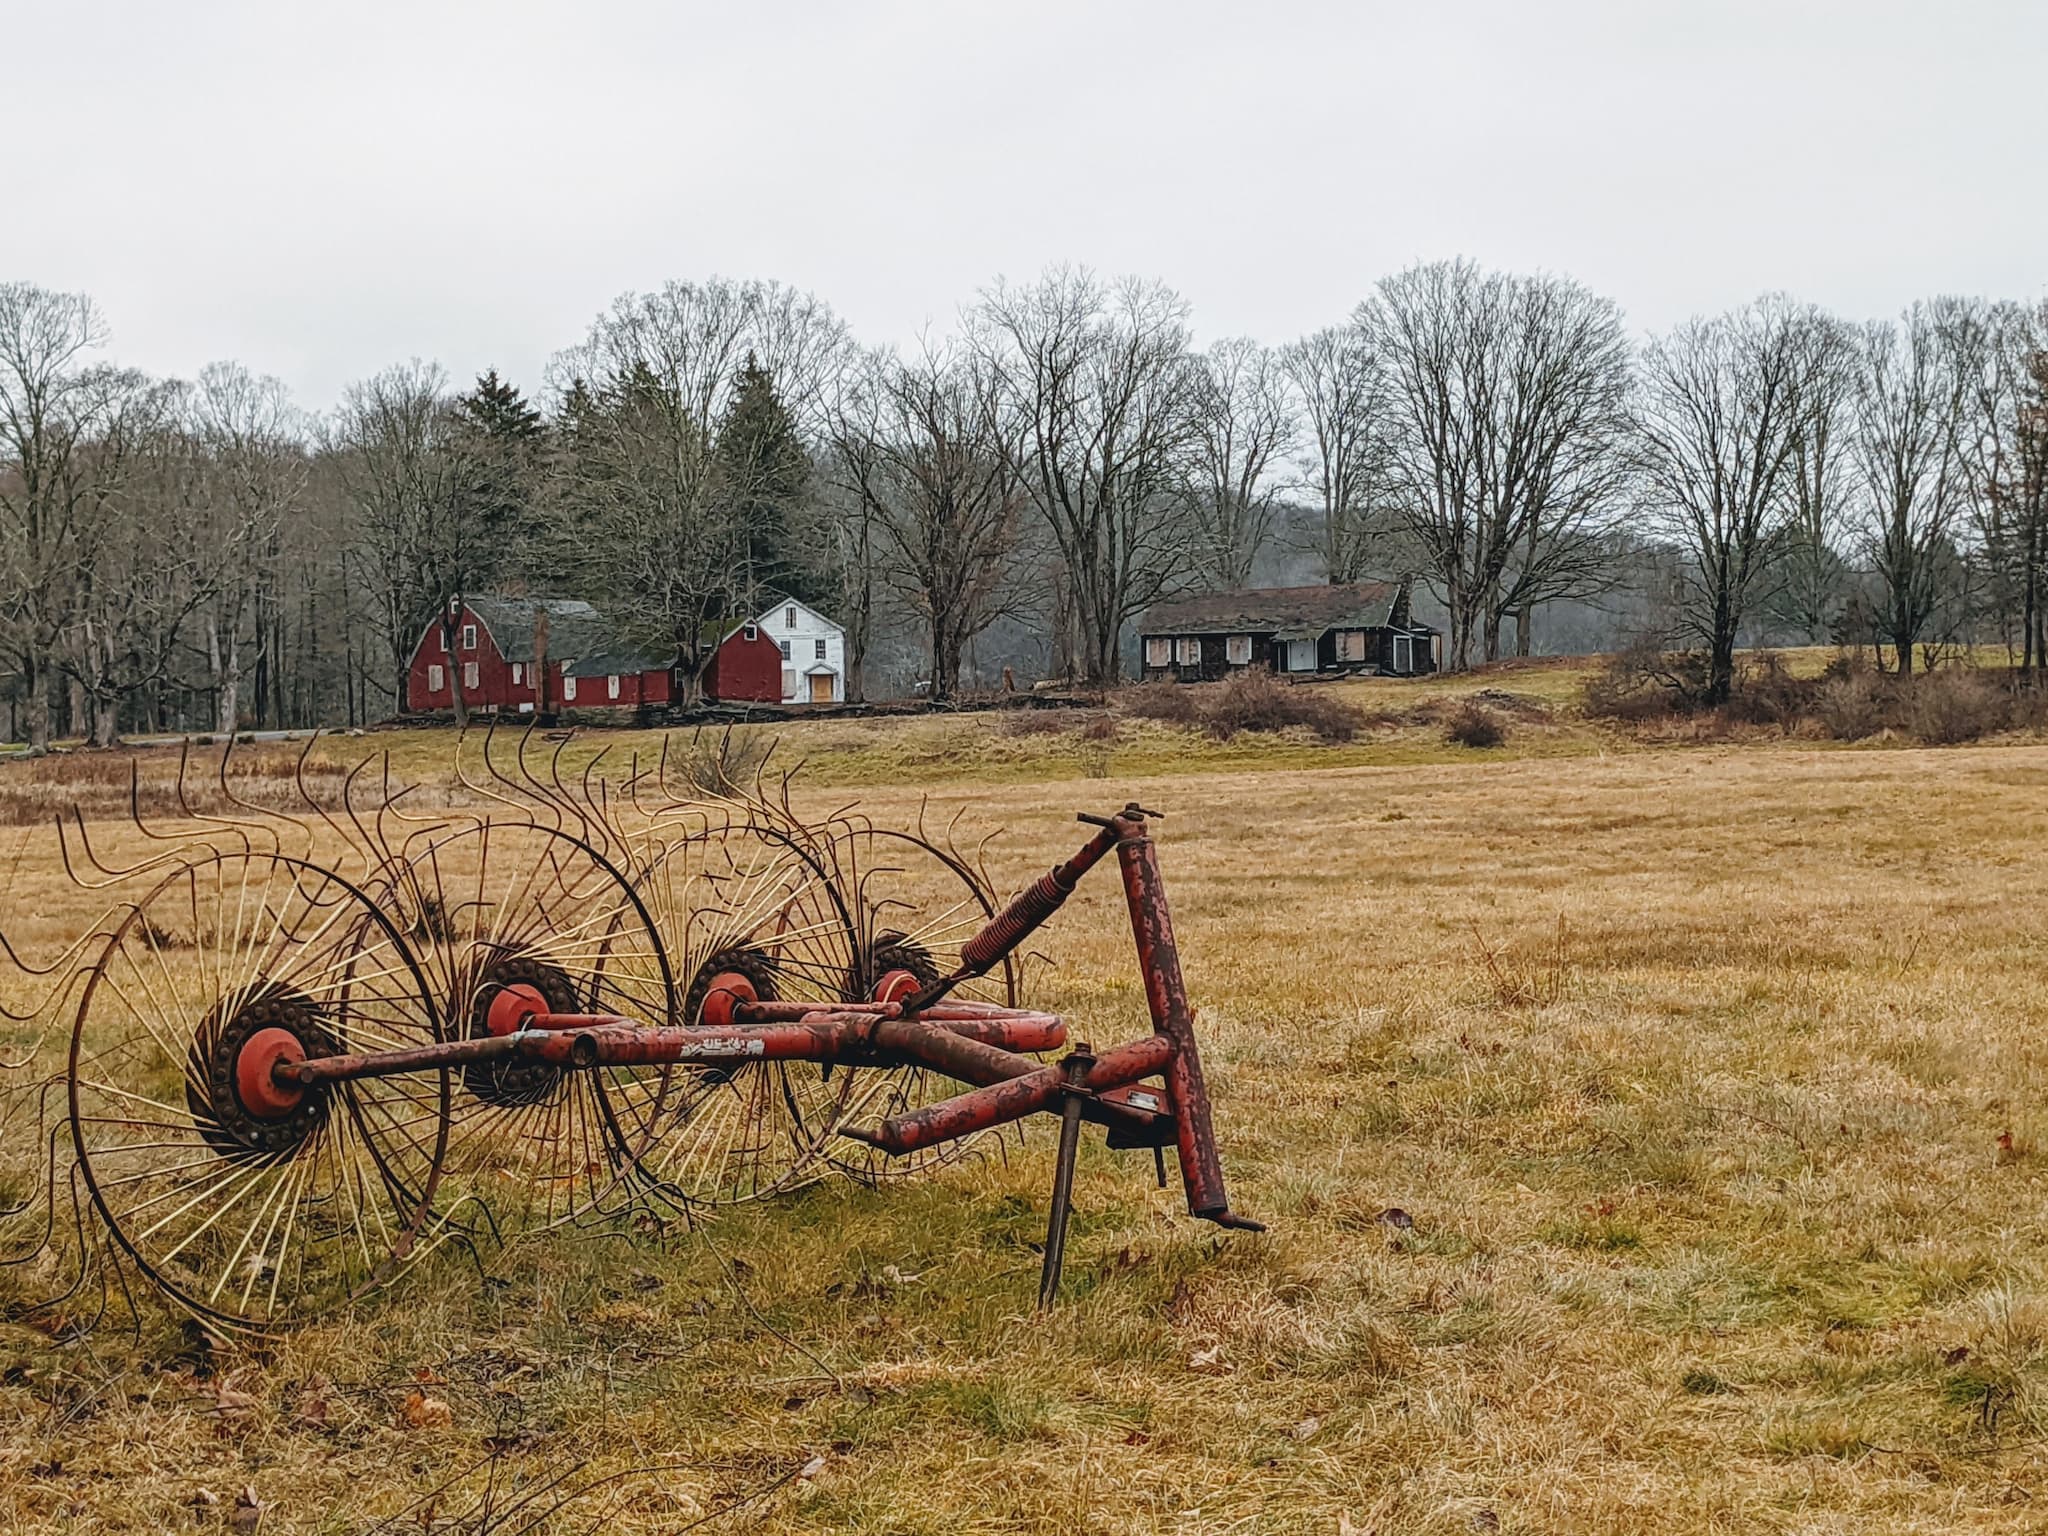 brown grass field with farm machinery in the foreground and buildings and bare trees in the background.